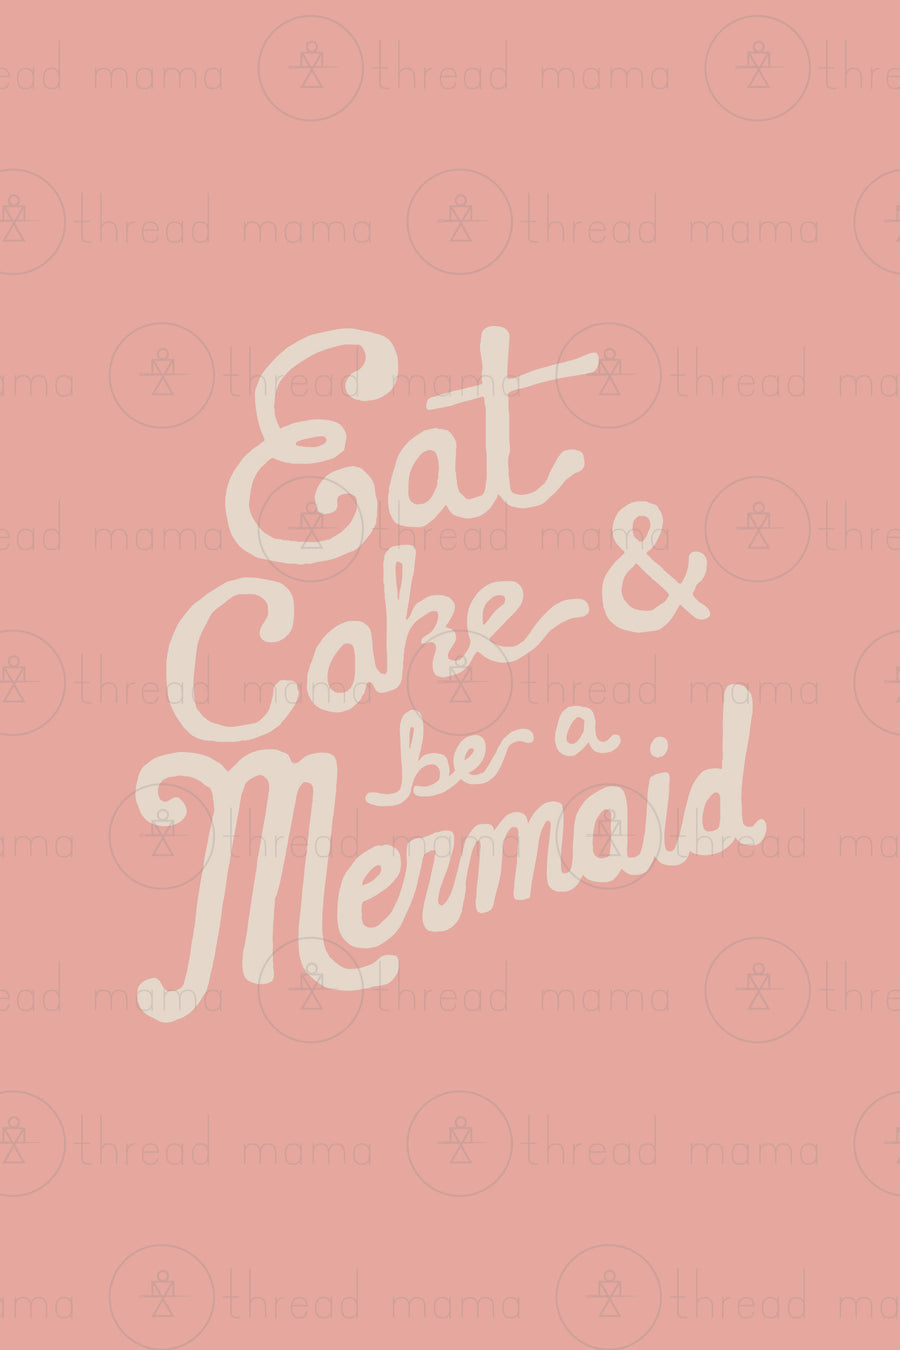 Eat Cake and be a Mermaid - Set